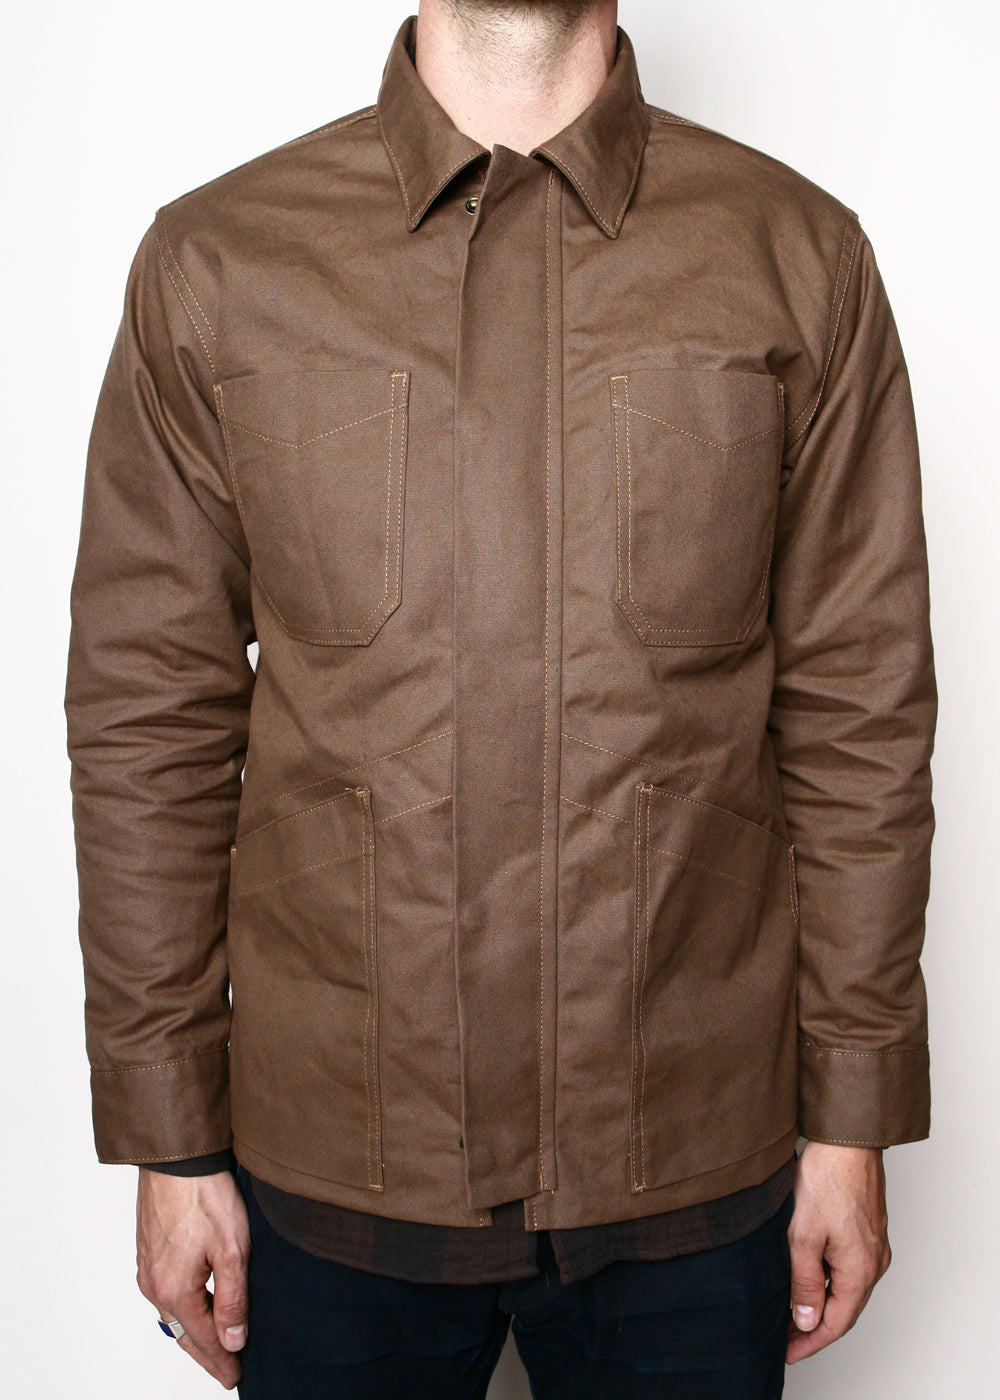 Rogue Territory Infantry Lined Jacket